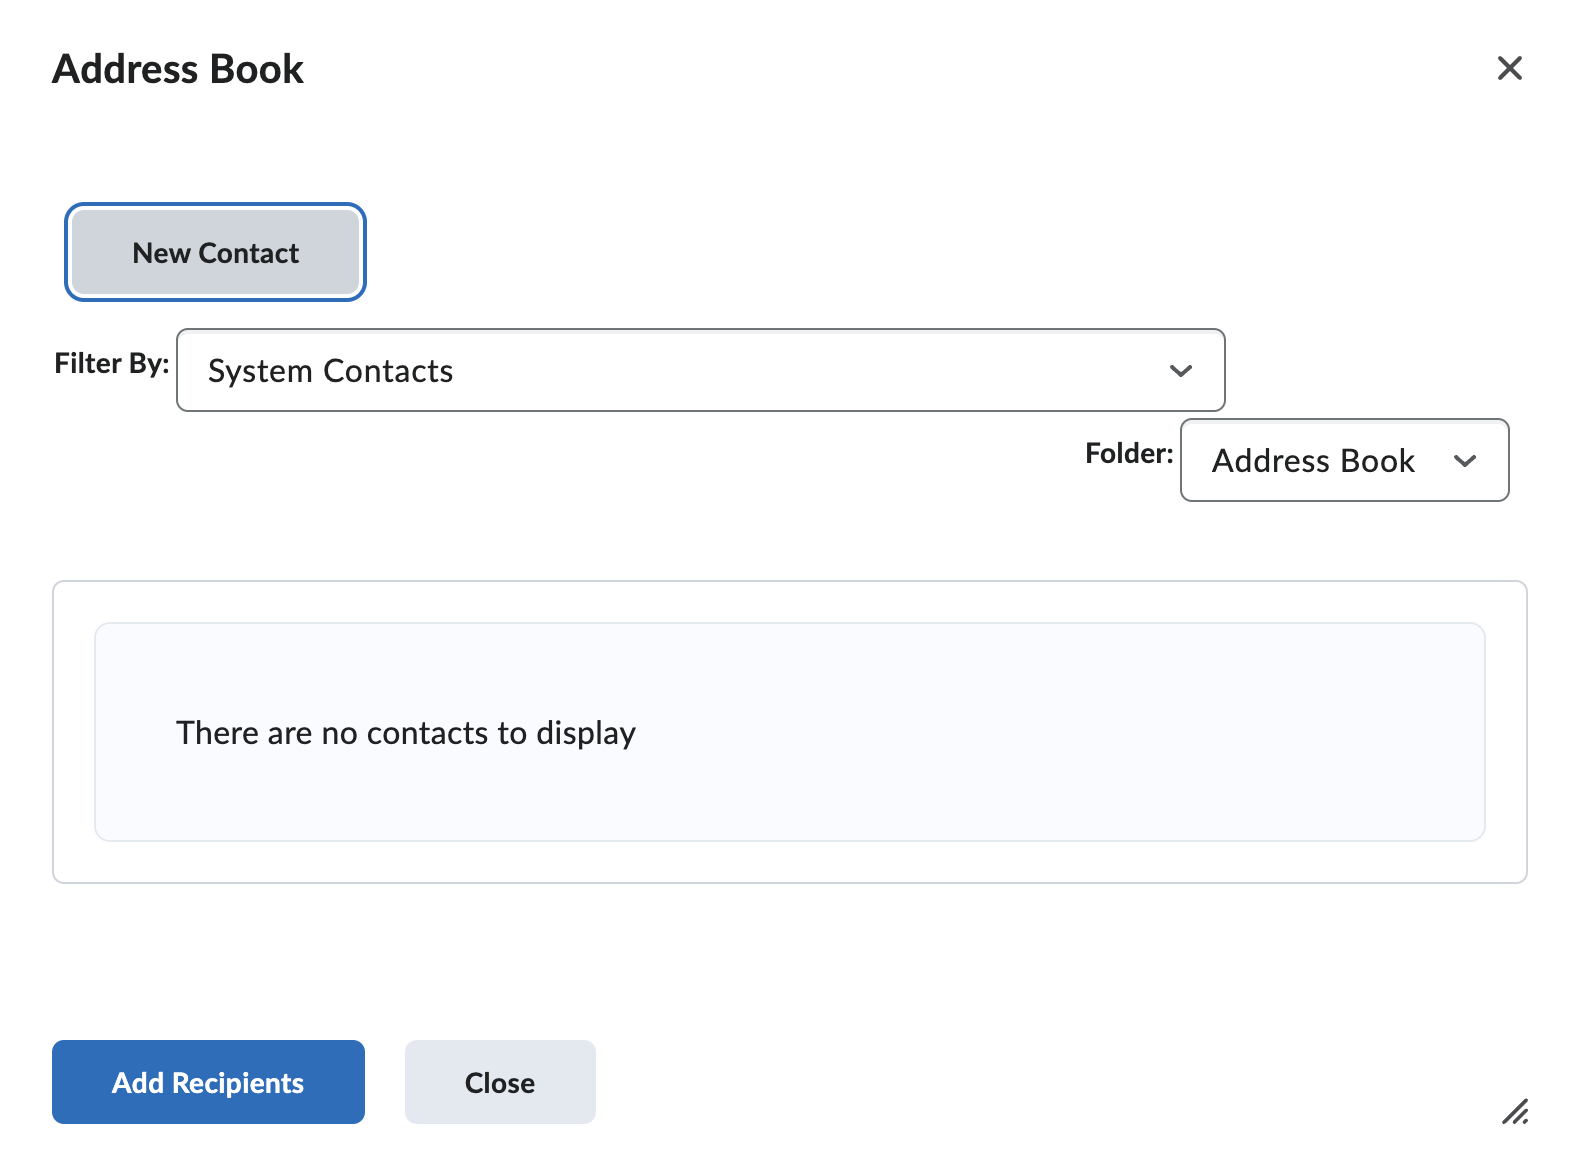 address book showing "no contacts to display"